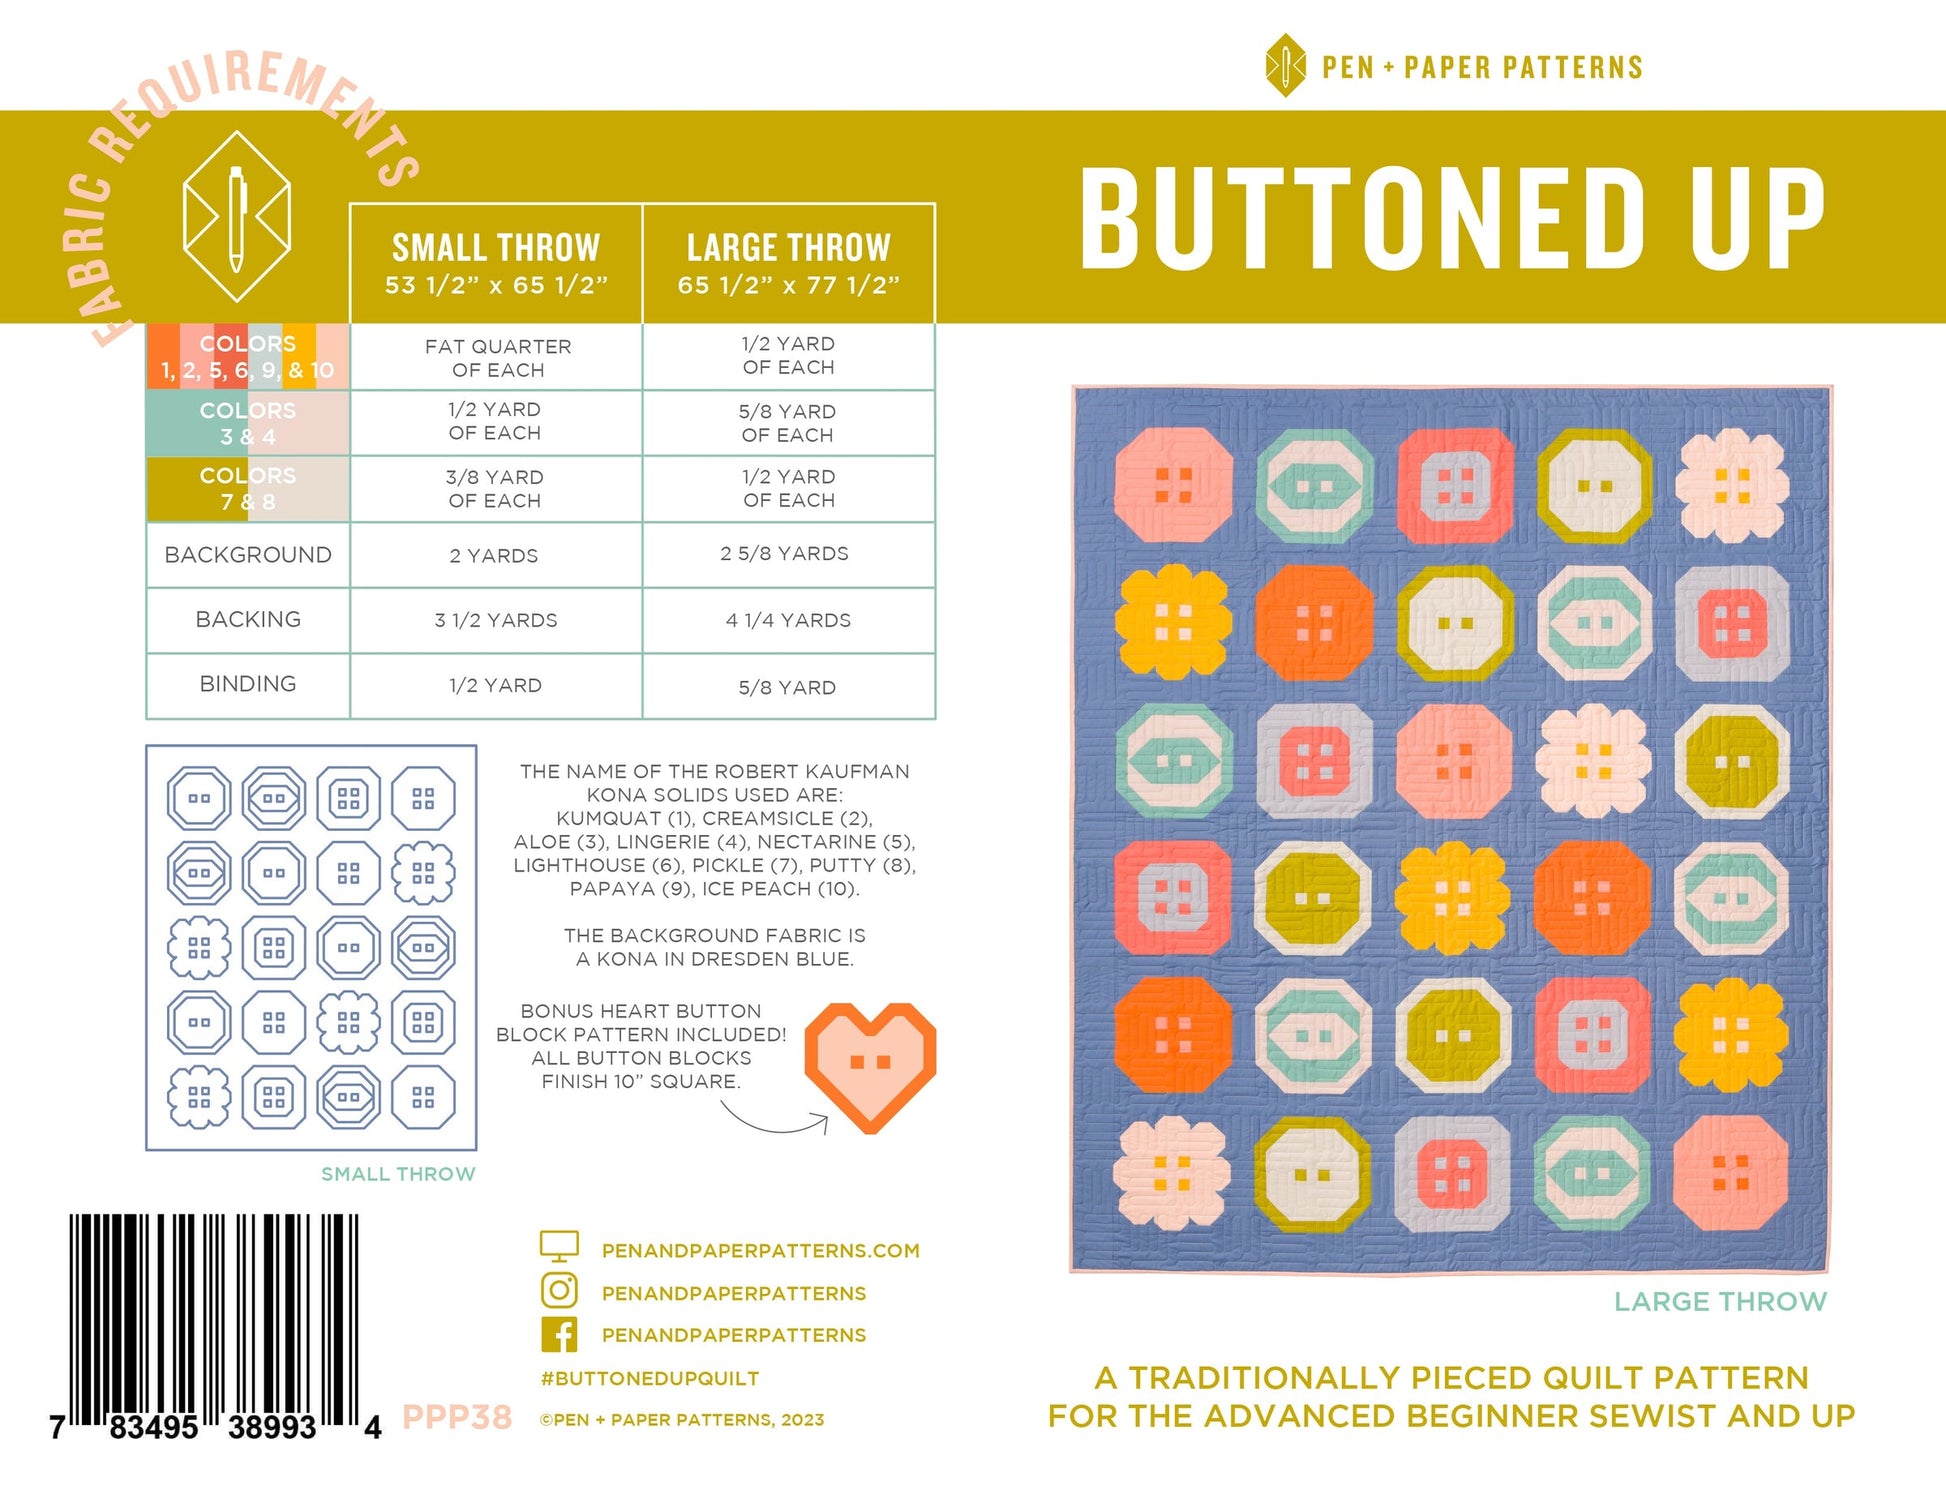 Other Buttoned Up Quilt Pattern by Pen + Paper Patterns - Printed Booklet